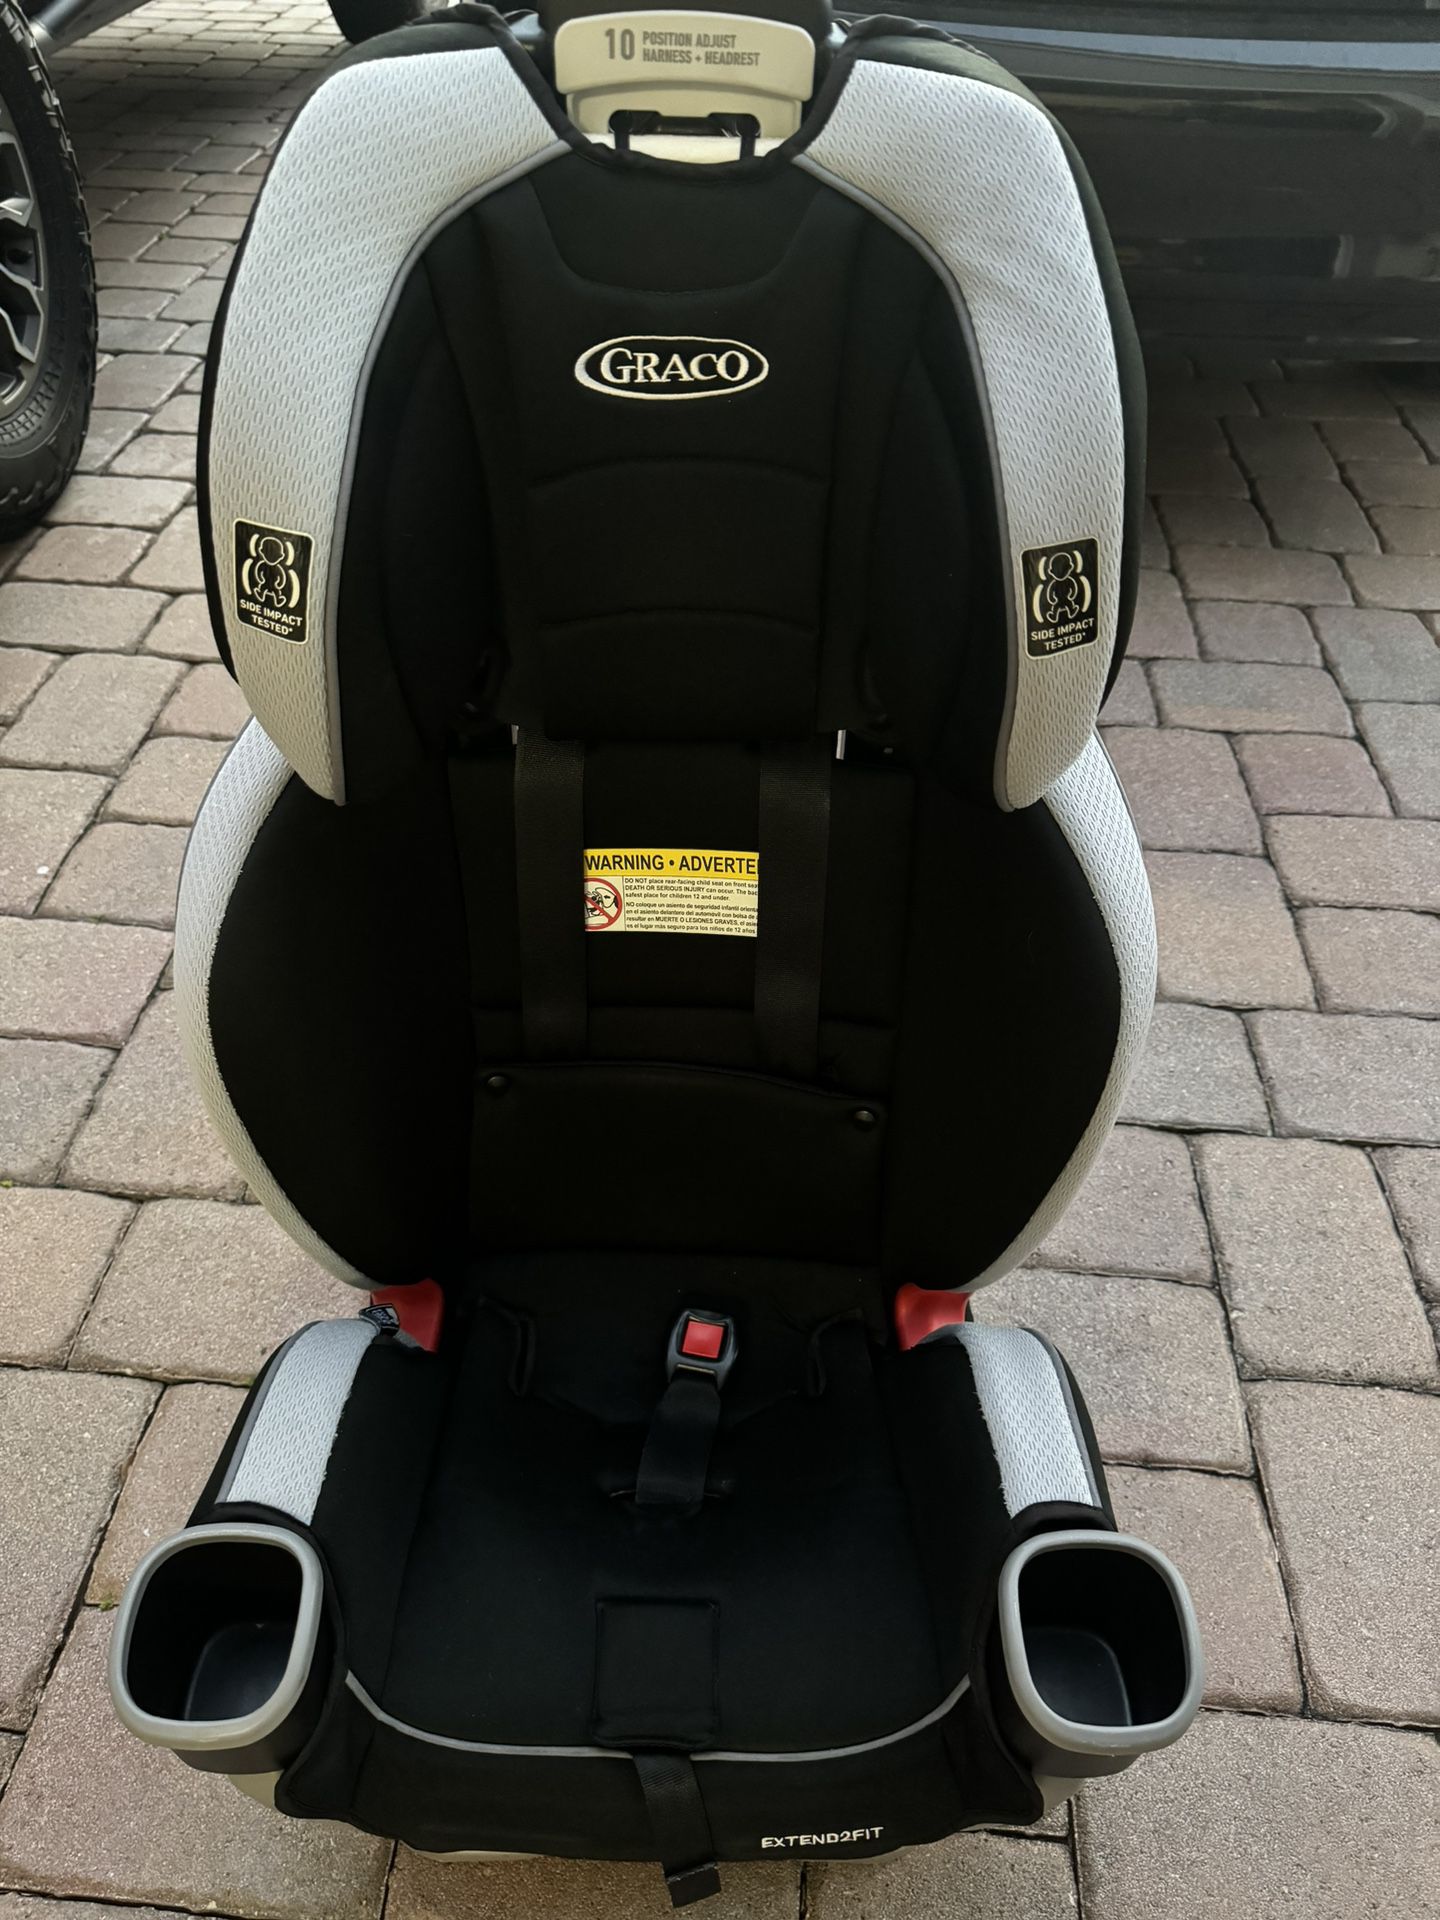 Graco Car seat , Extended2fit